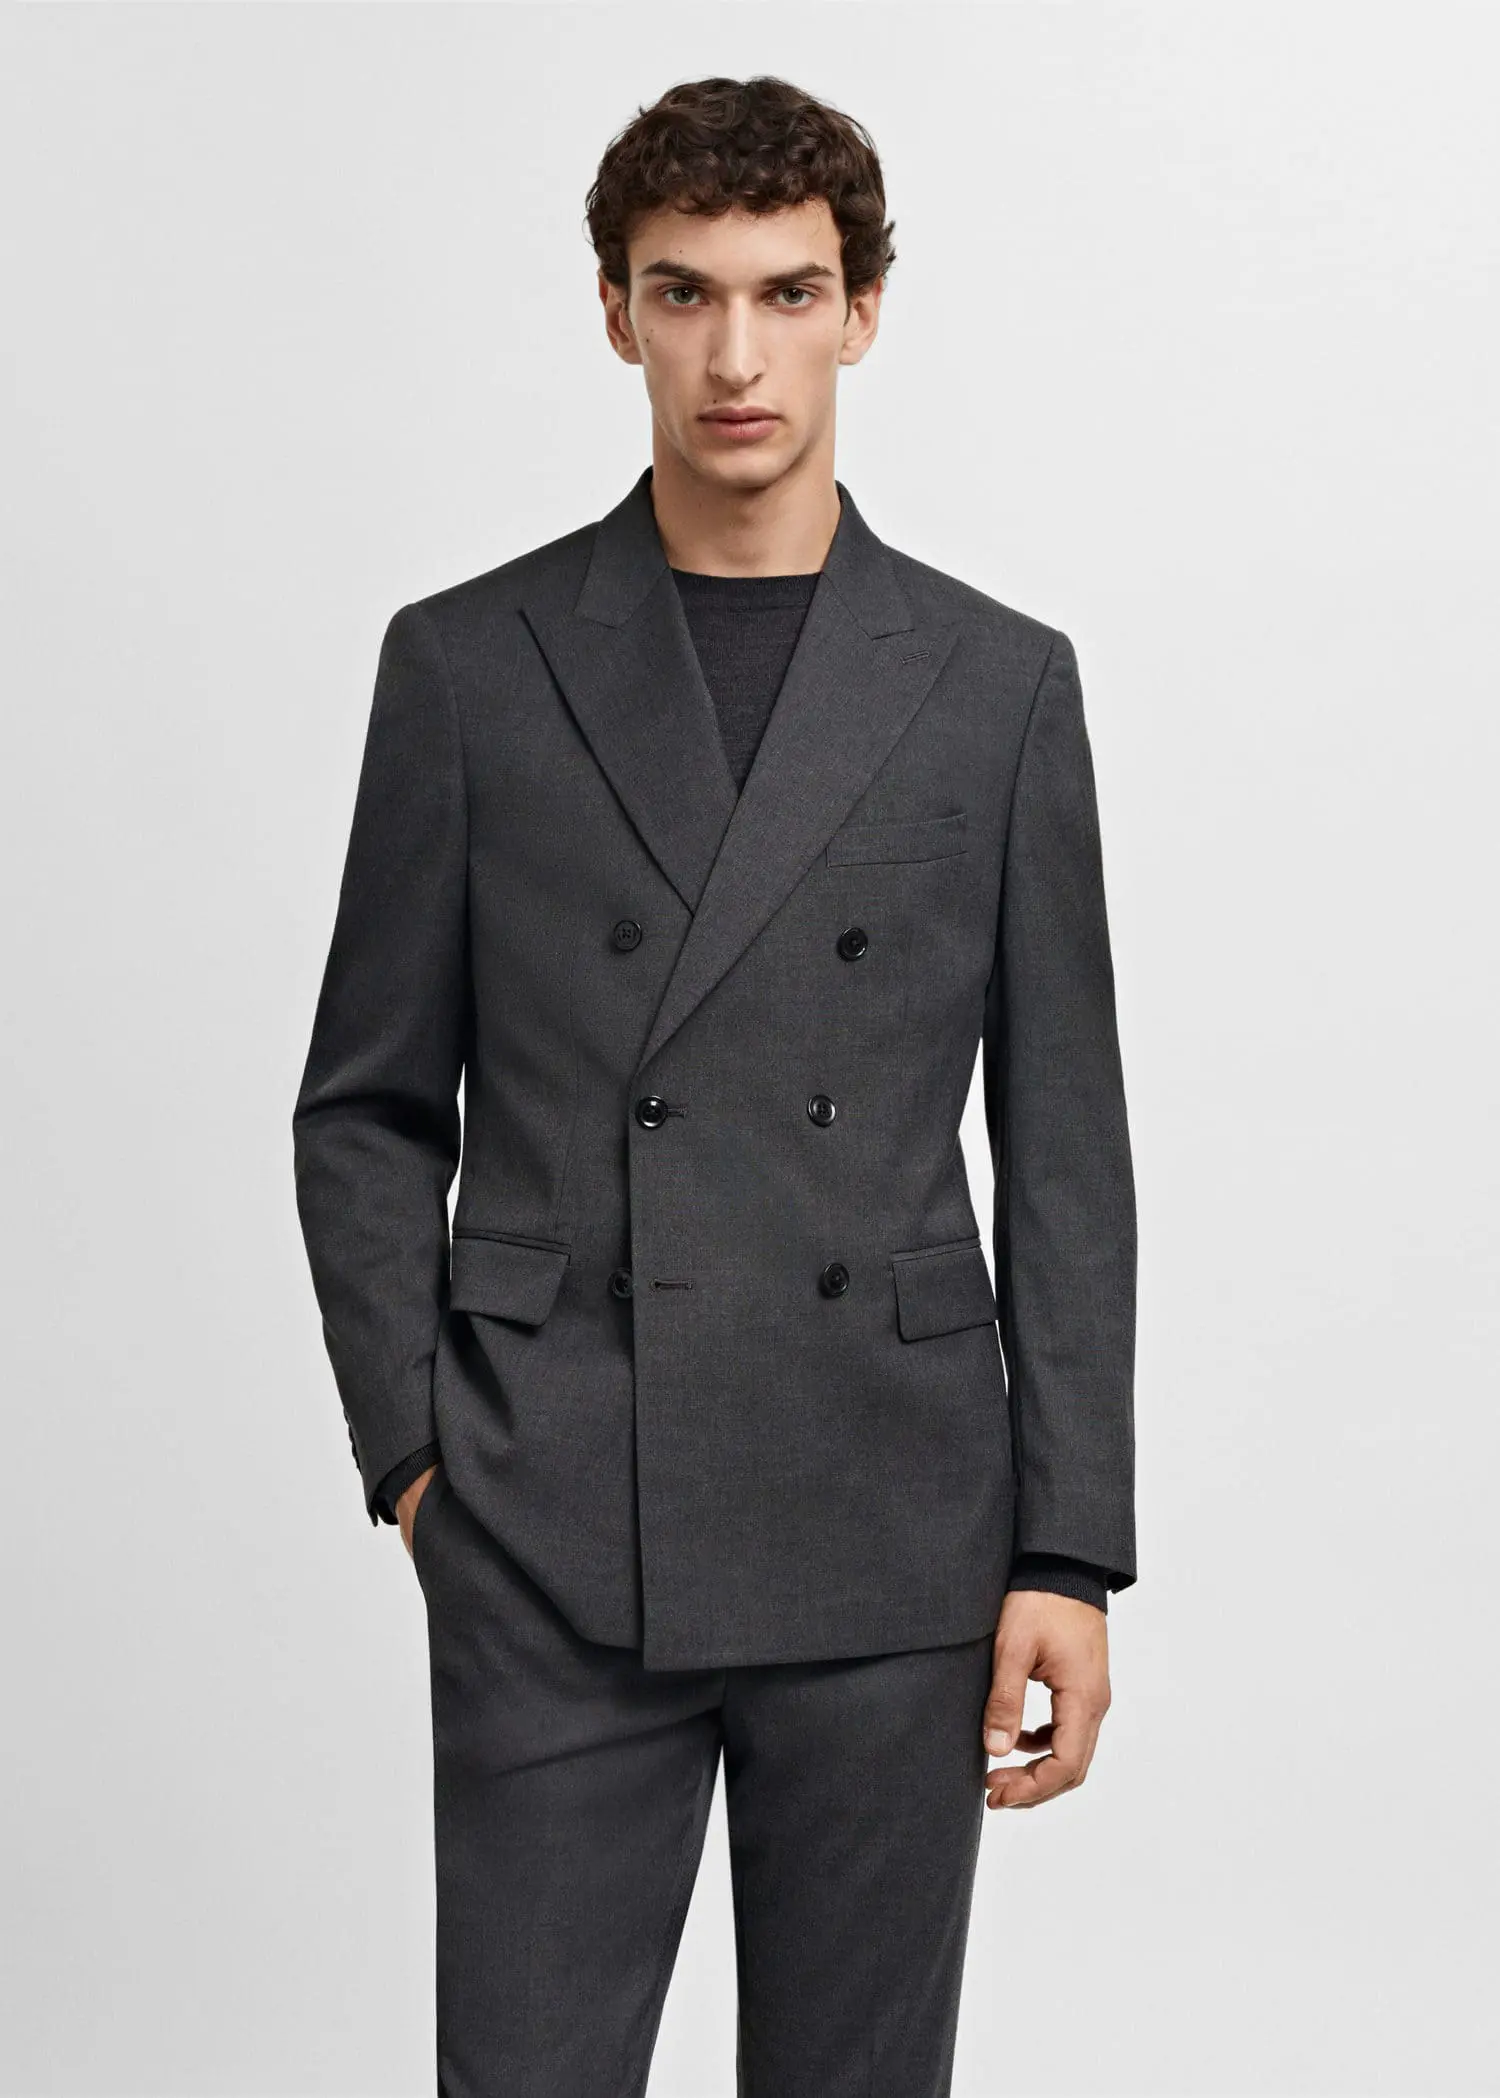 Mango Slim fit double-breasted suit blazer. 2